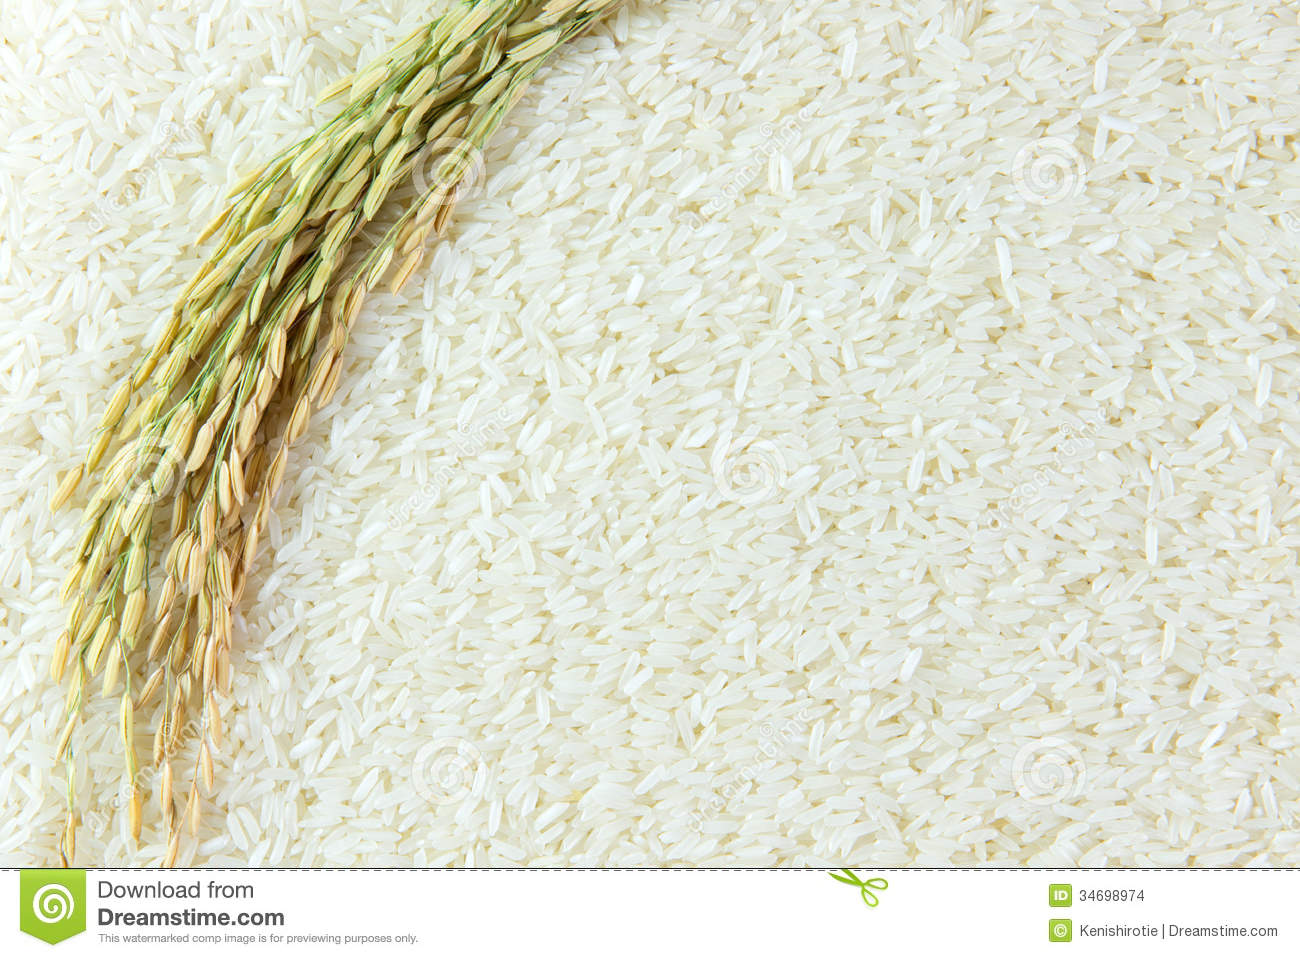 Rice Grain Stock Images   Image  34698974